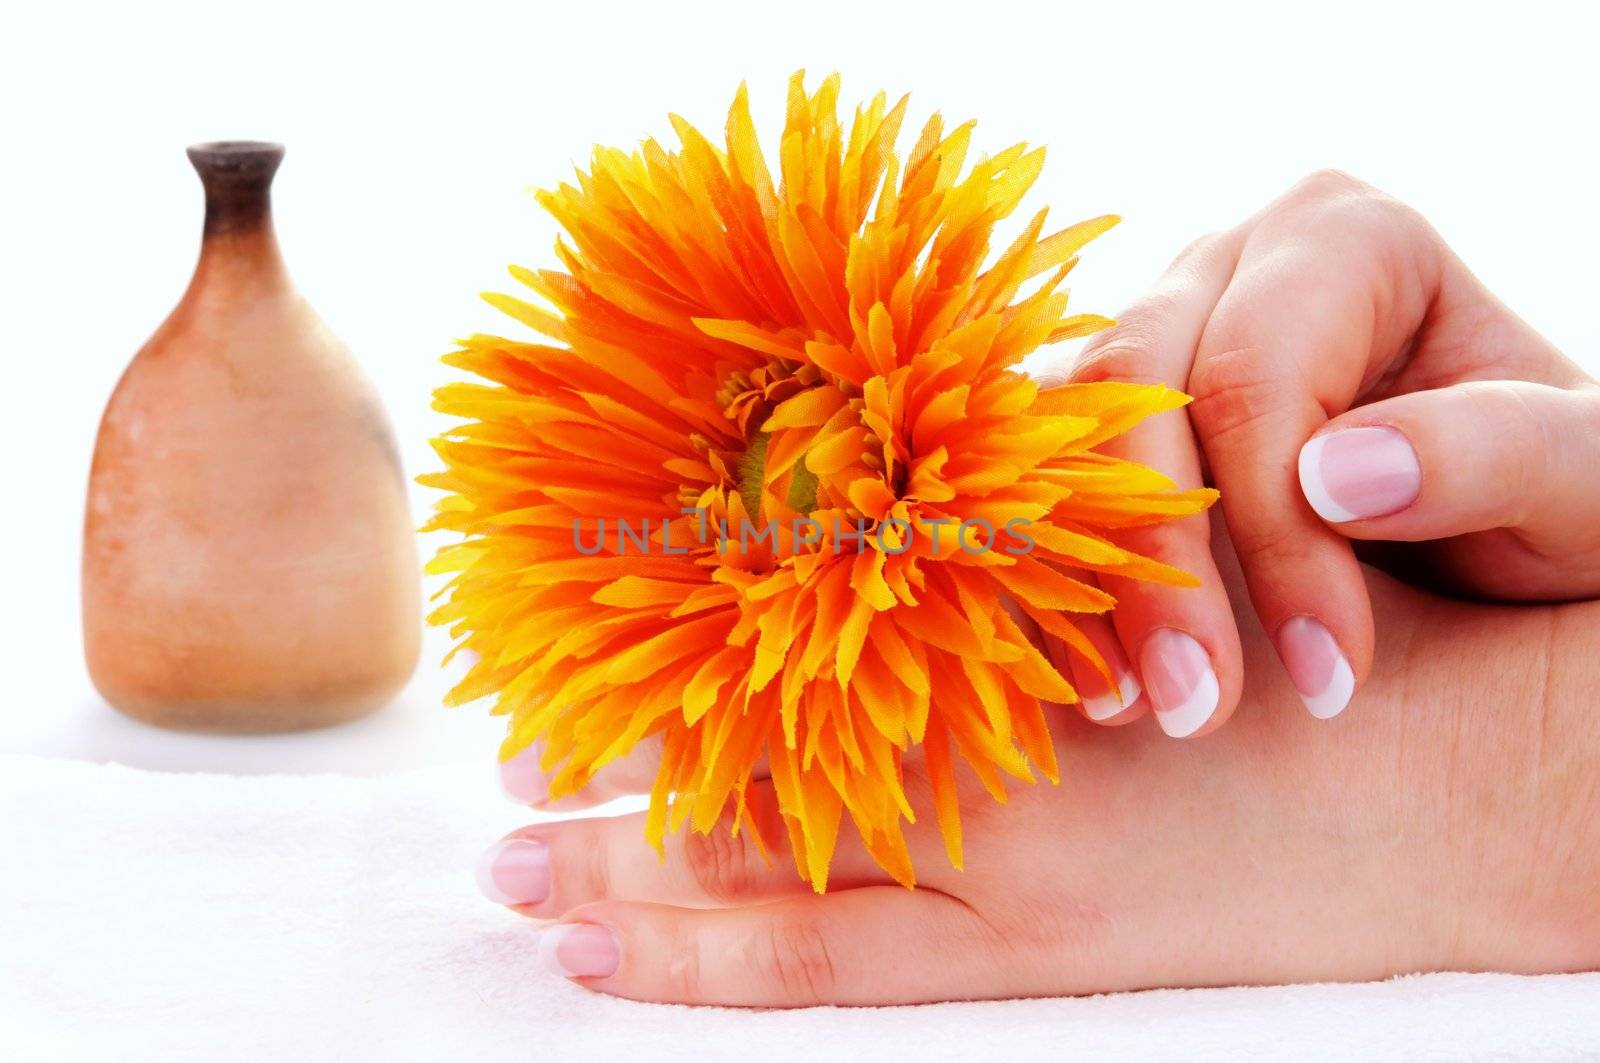 Female hands with nice french manicure and a flower on white towel